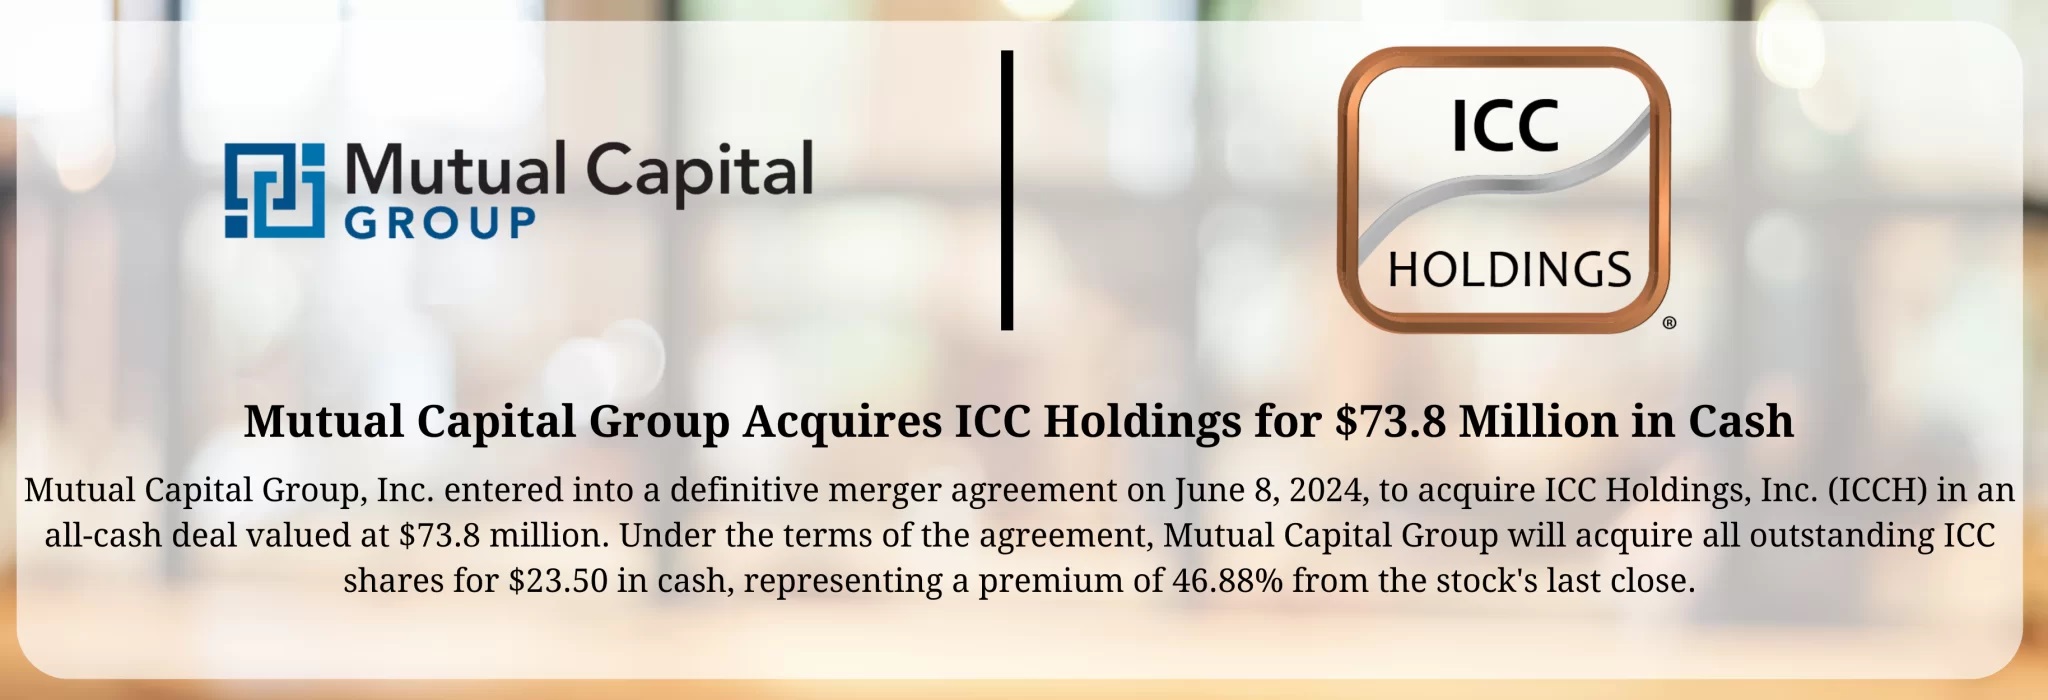 Mutual Capital Group to Acquire ICC Holdings for $73.8 Million in Cash